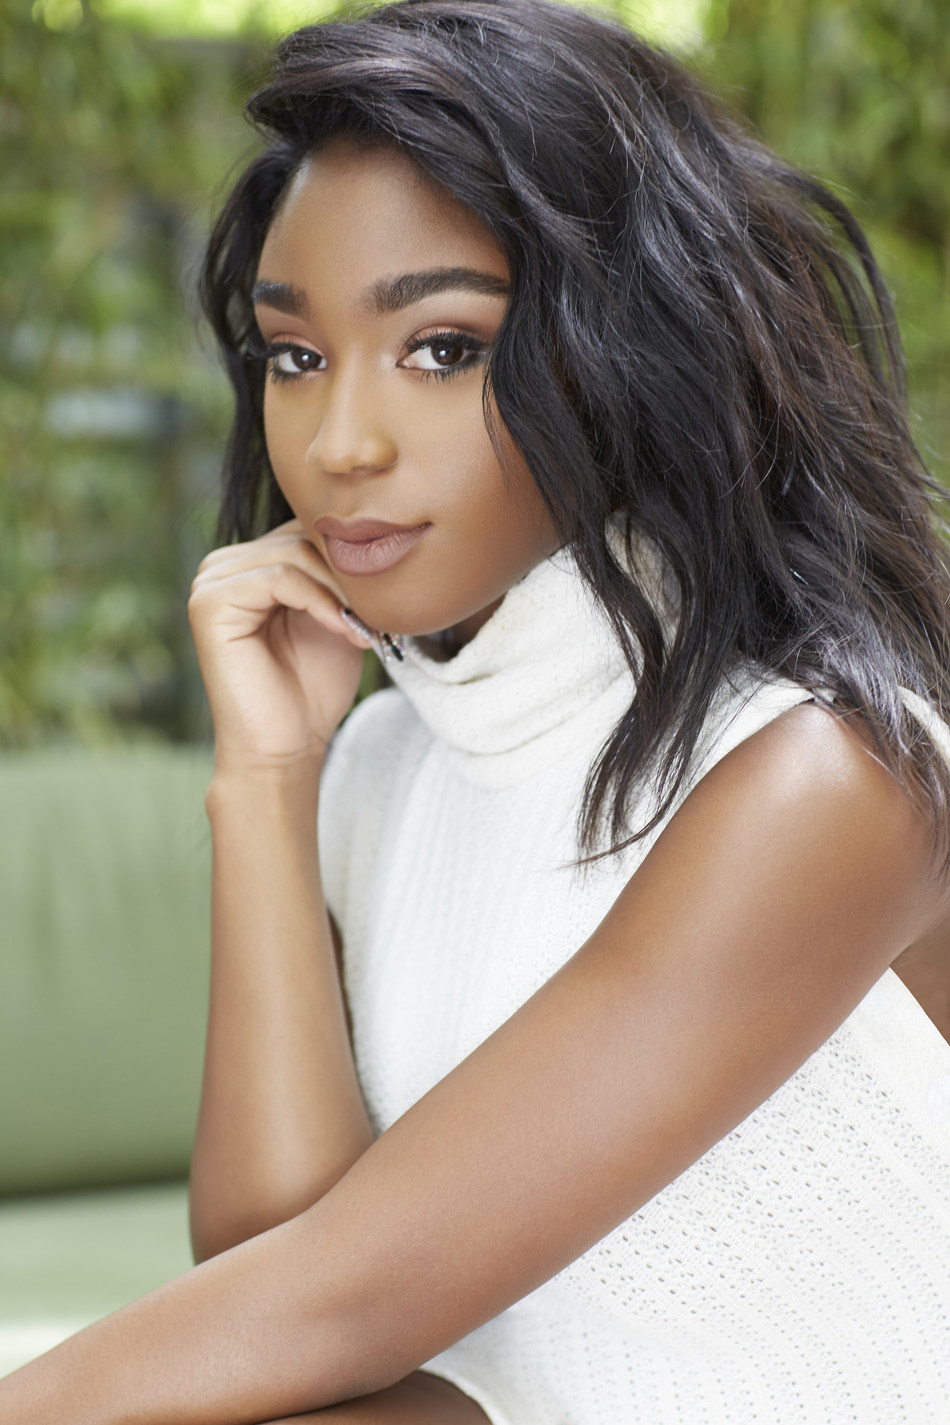 Normani Kordei, of the internationally acclaimed pop group Fifth Harmony, has partnered with the American Cancer Society as a global ambassador to help increase awareness about the importance of breast cancer screening and HPV vaccination.